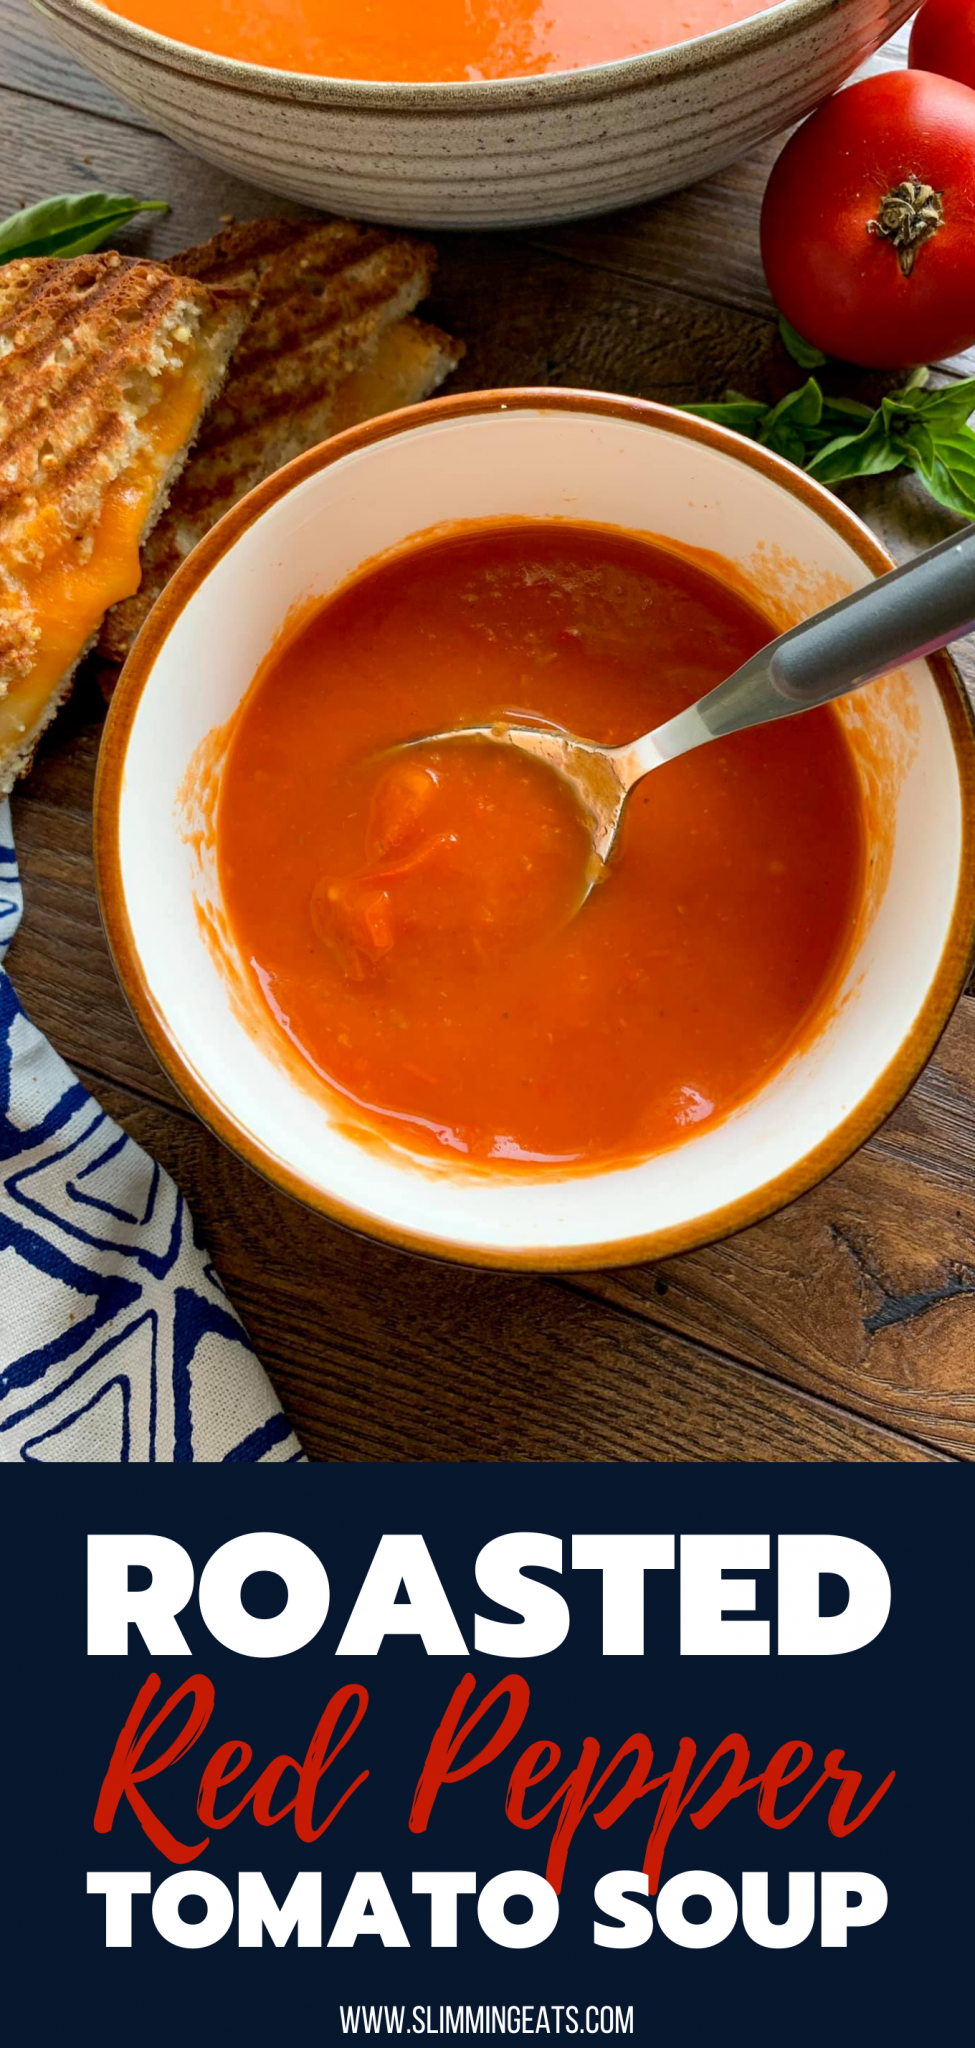 Roasted Red Pepper and Tomato Soup in cup with spoon, grilled. cheese to left and scattered tomatoes and basil to right.